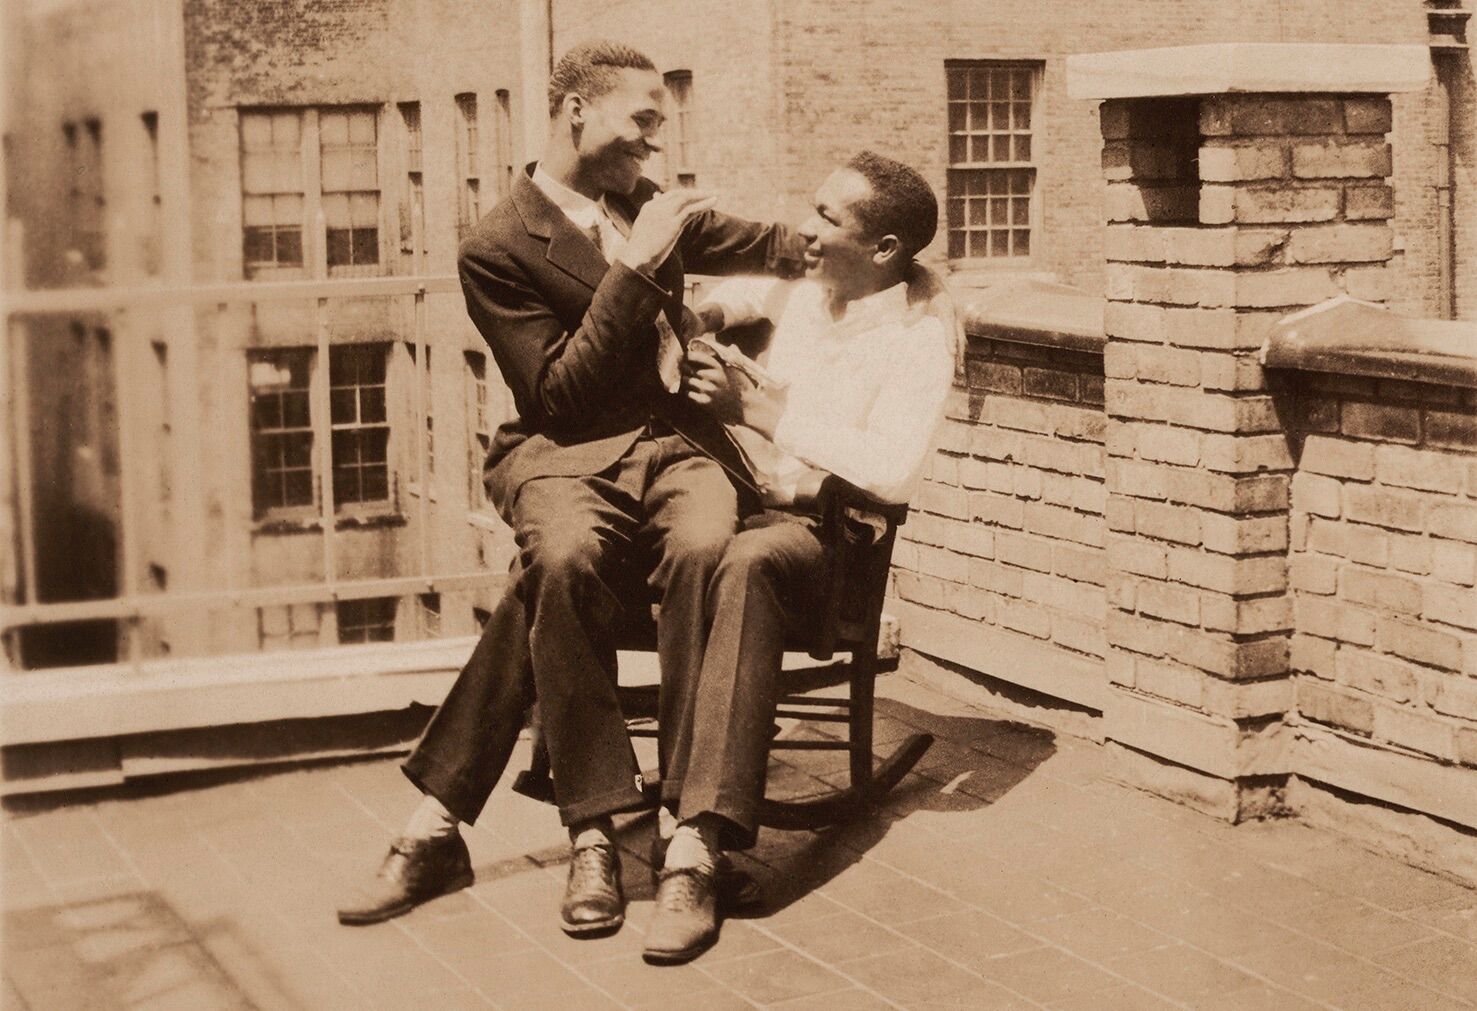 Two Black men pose in a rocking chair on a city rooftop